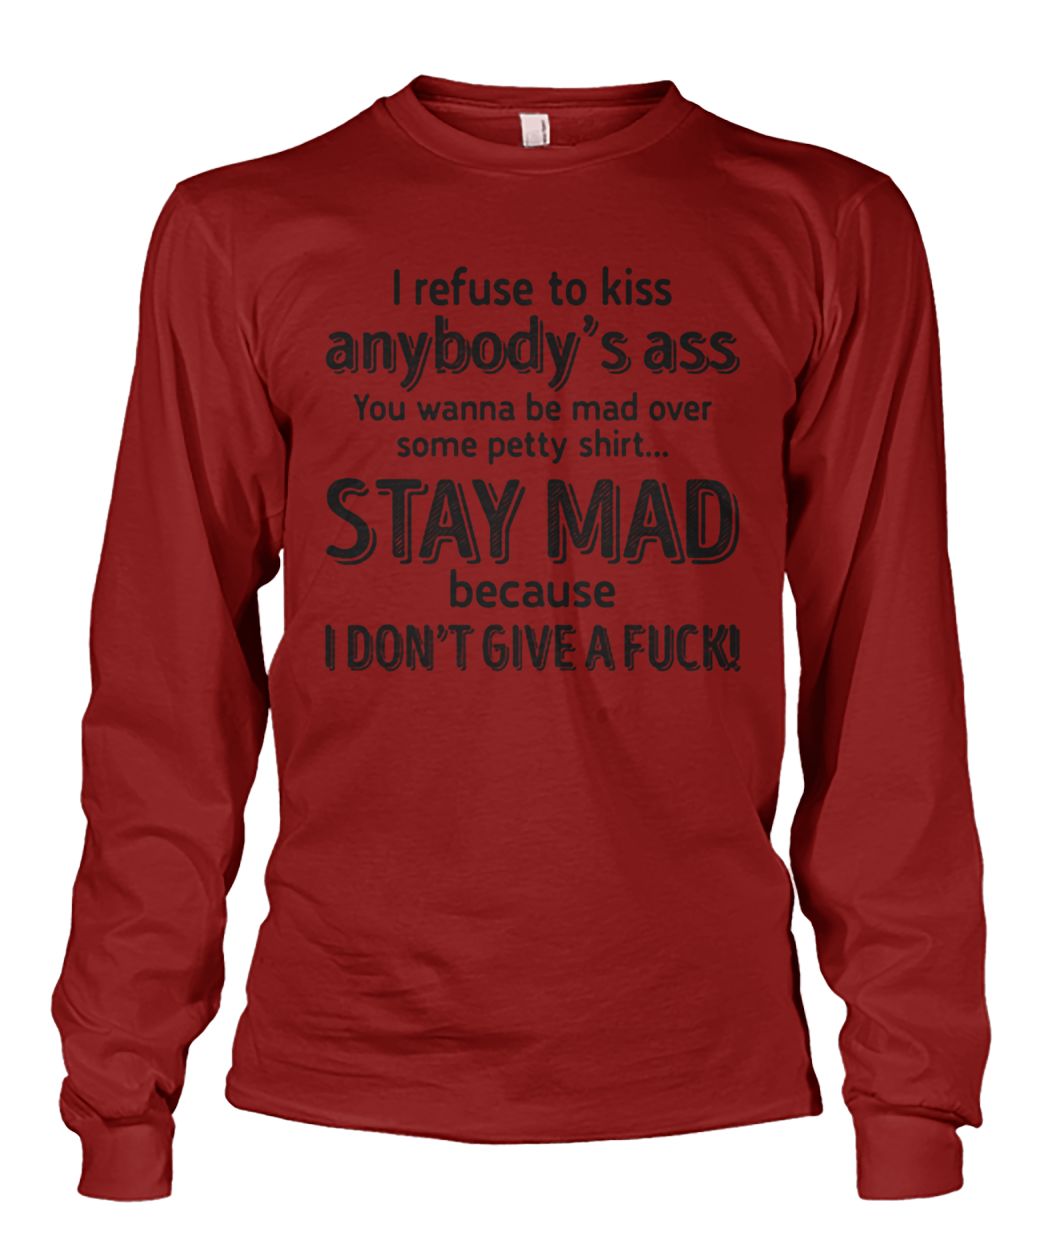 I refuse to kiss anybody's ass you wanna be mad over some petty shit stay mad unisex long sleeve